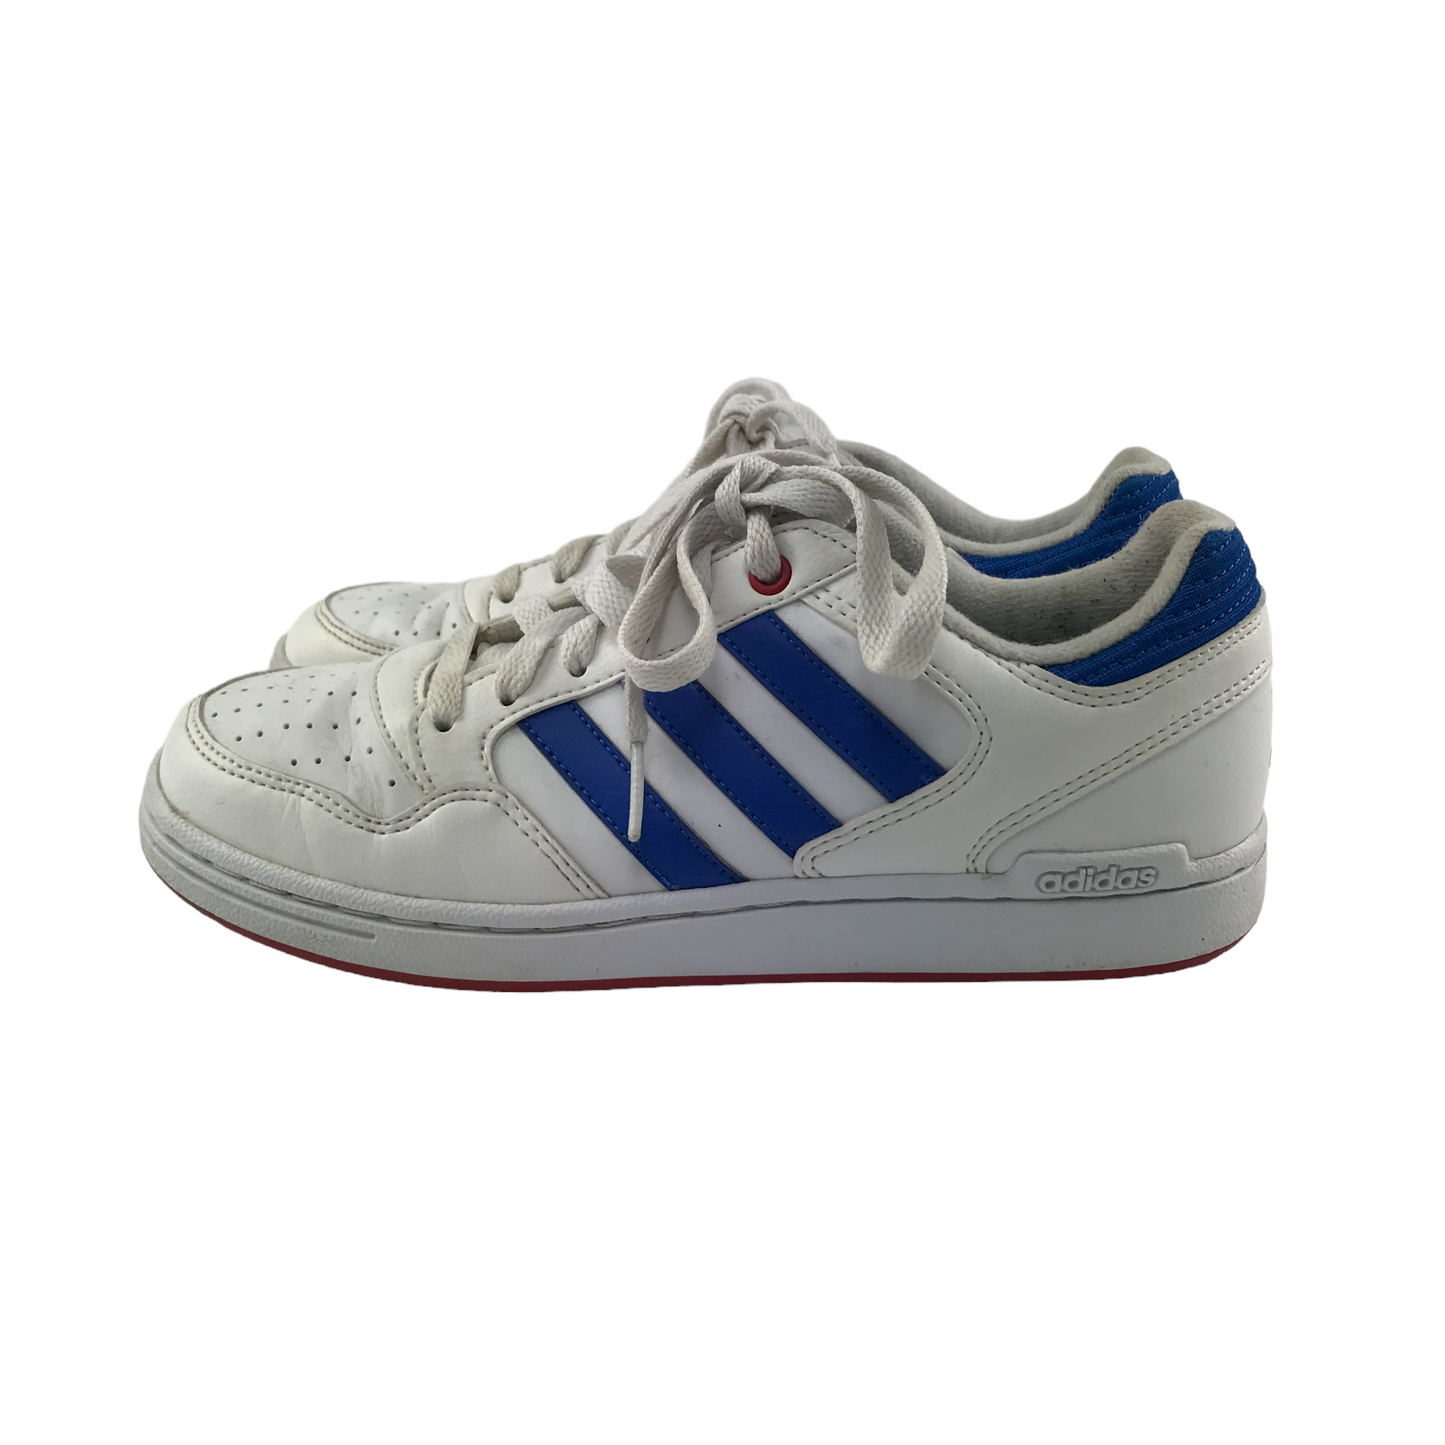 Adidas Trainers Shoe Size 4 White and Blue Three Stripes